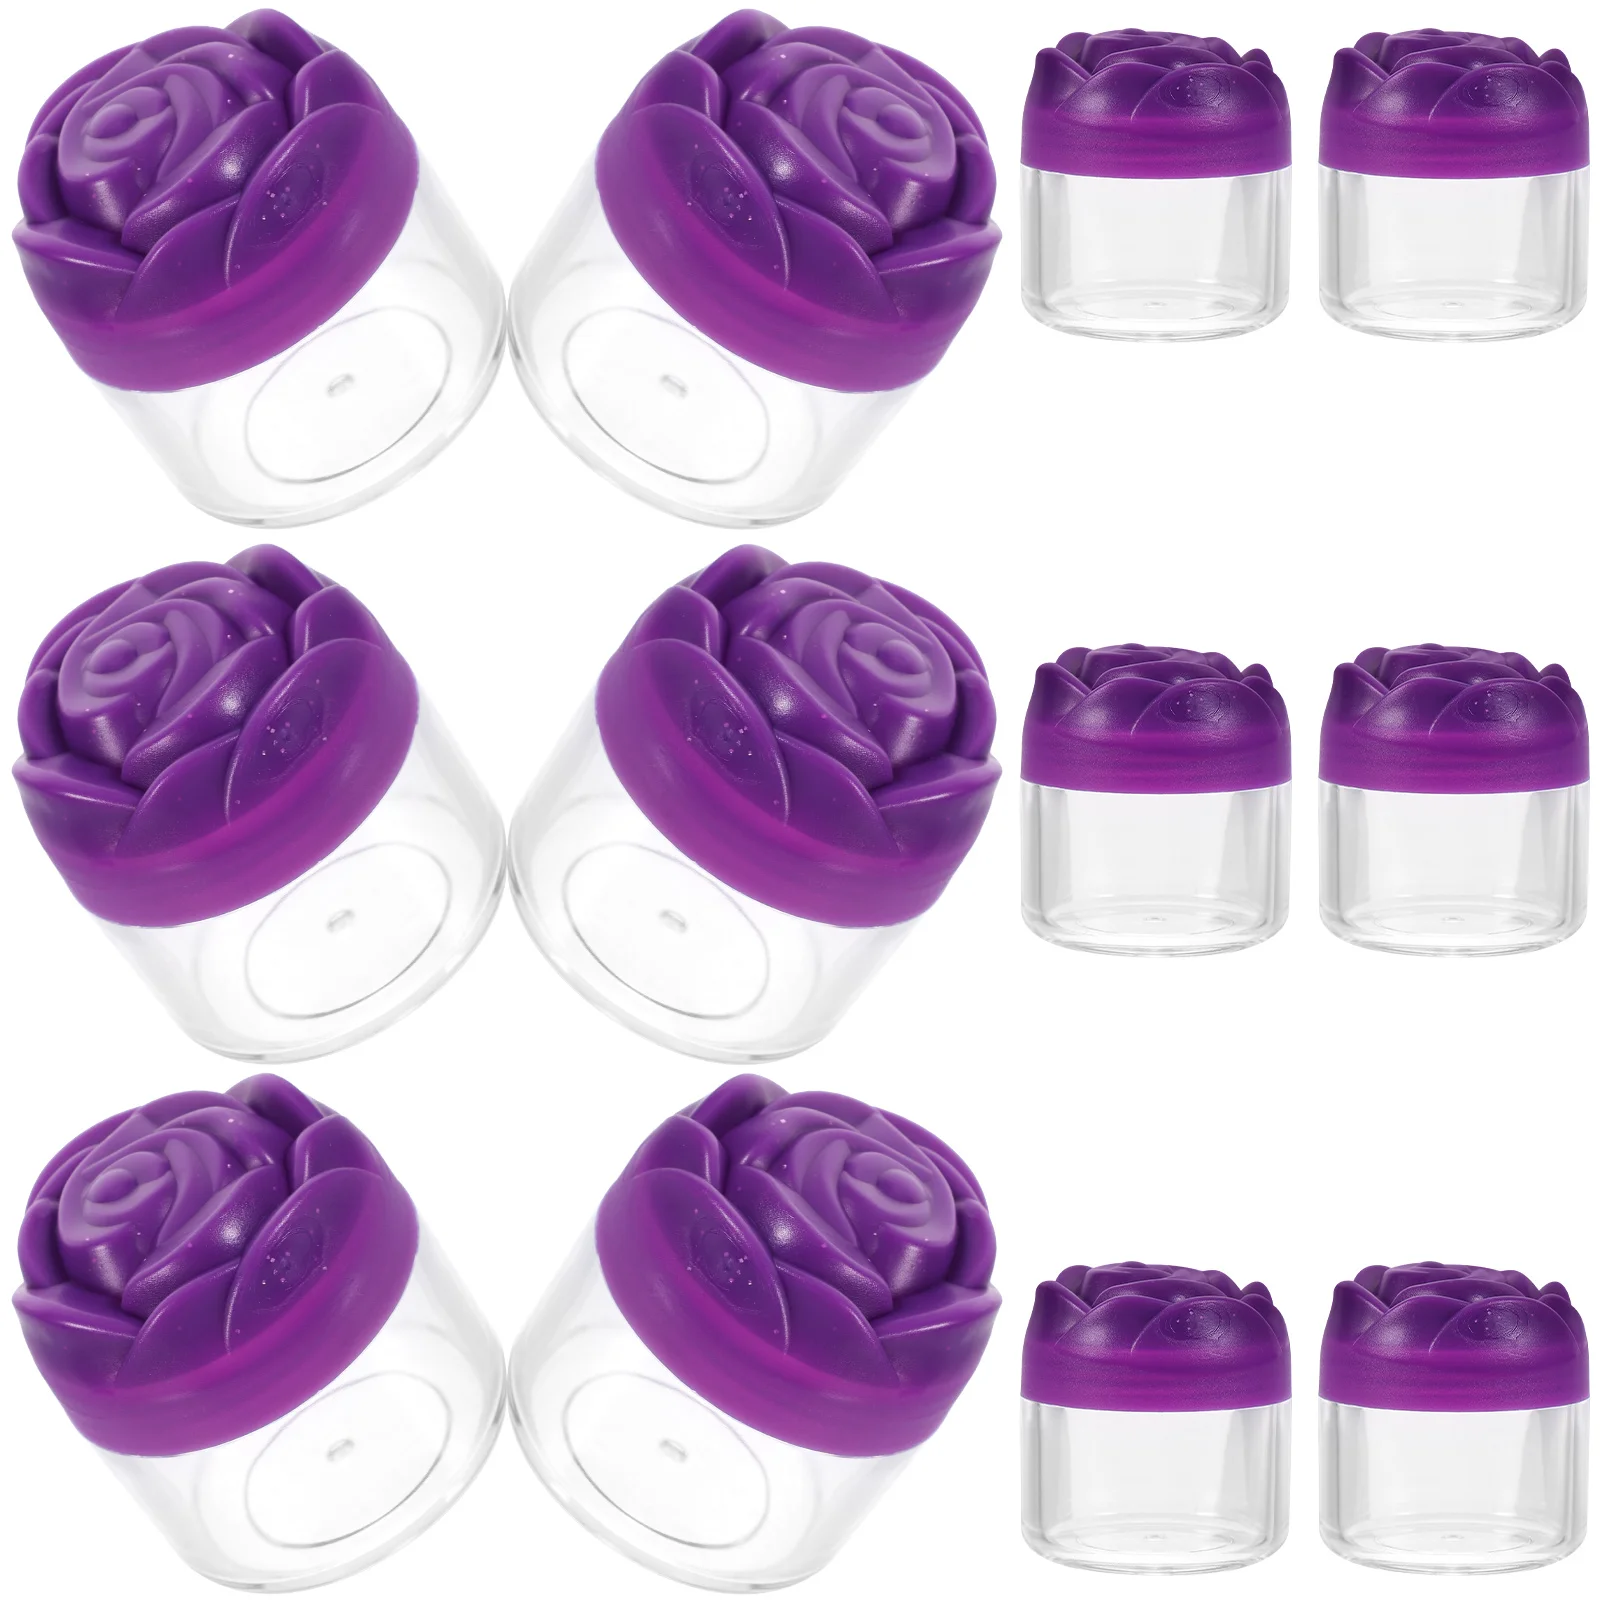 12 Pcs Travel Can Bottled Miss Moisturizer Face Cream Plastic Lip Balm Containers Containers